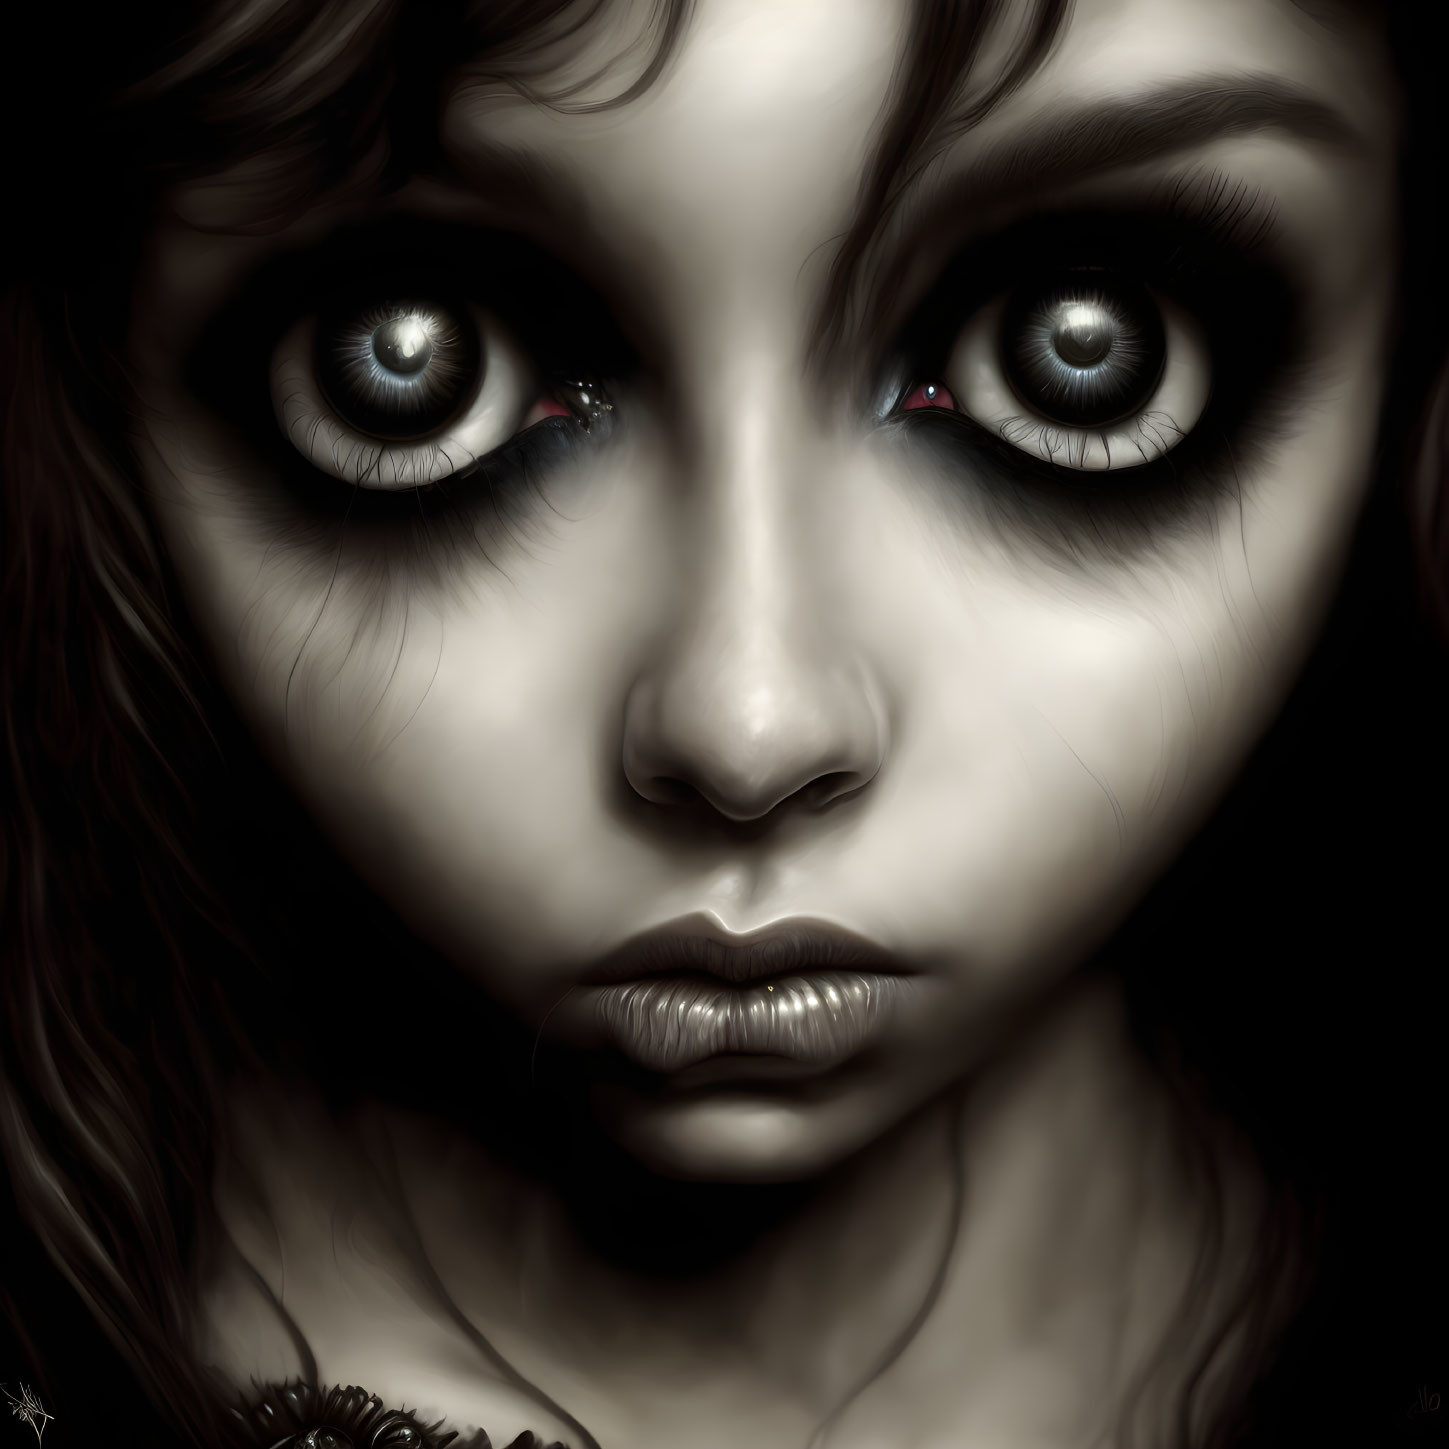 Detailed digital painting of a girl with expressive blue eyes.